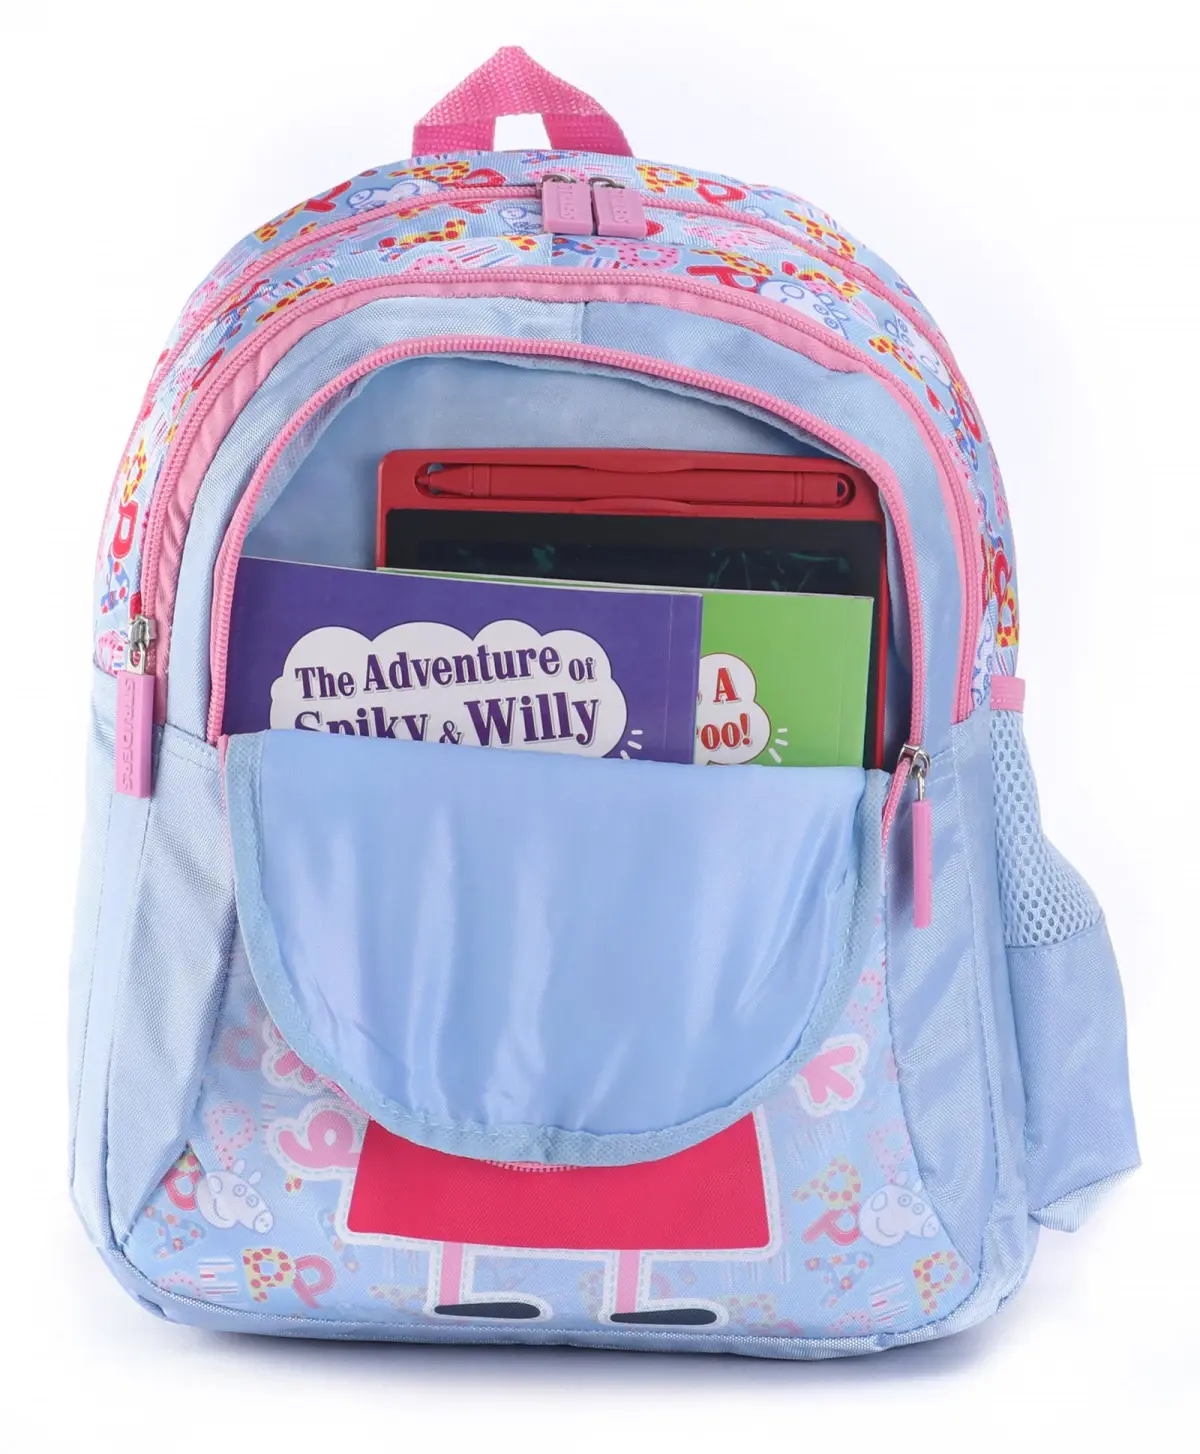 Striders 14 inches Peppa Pig-Inspired School Bag for Little Explorers Age Multicolour, 3Y+